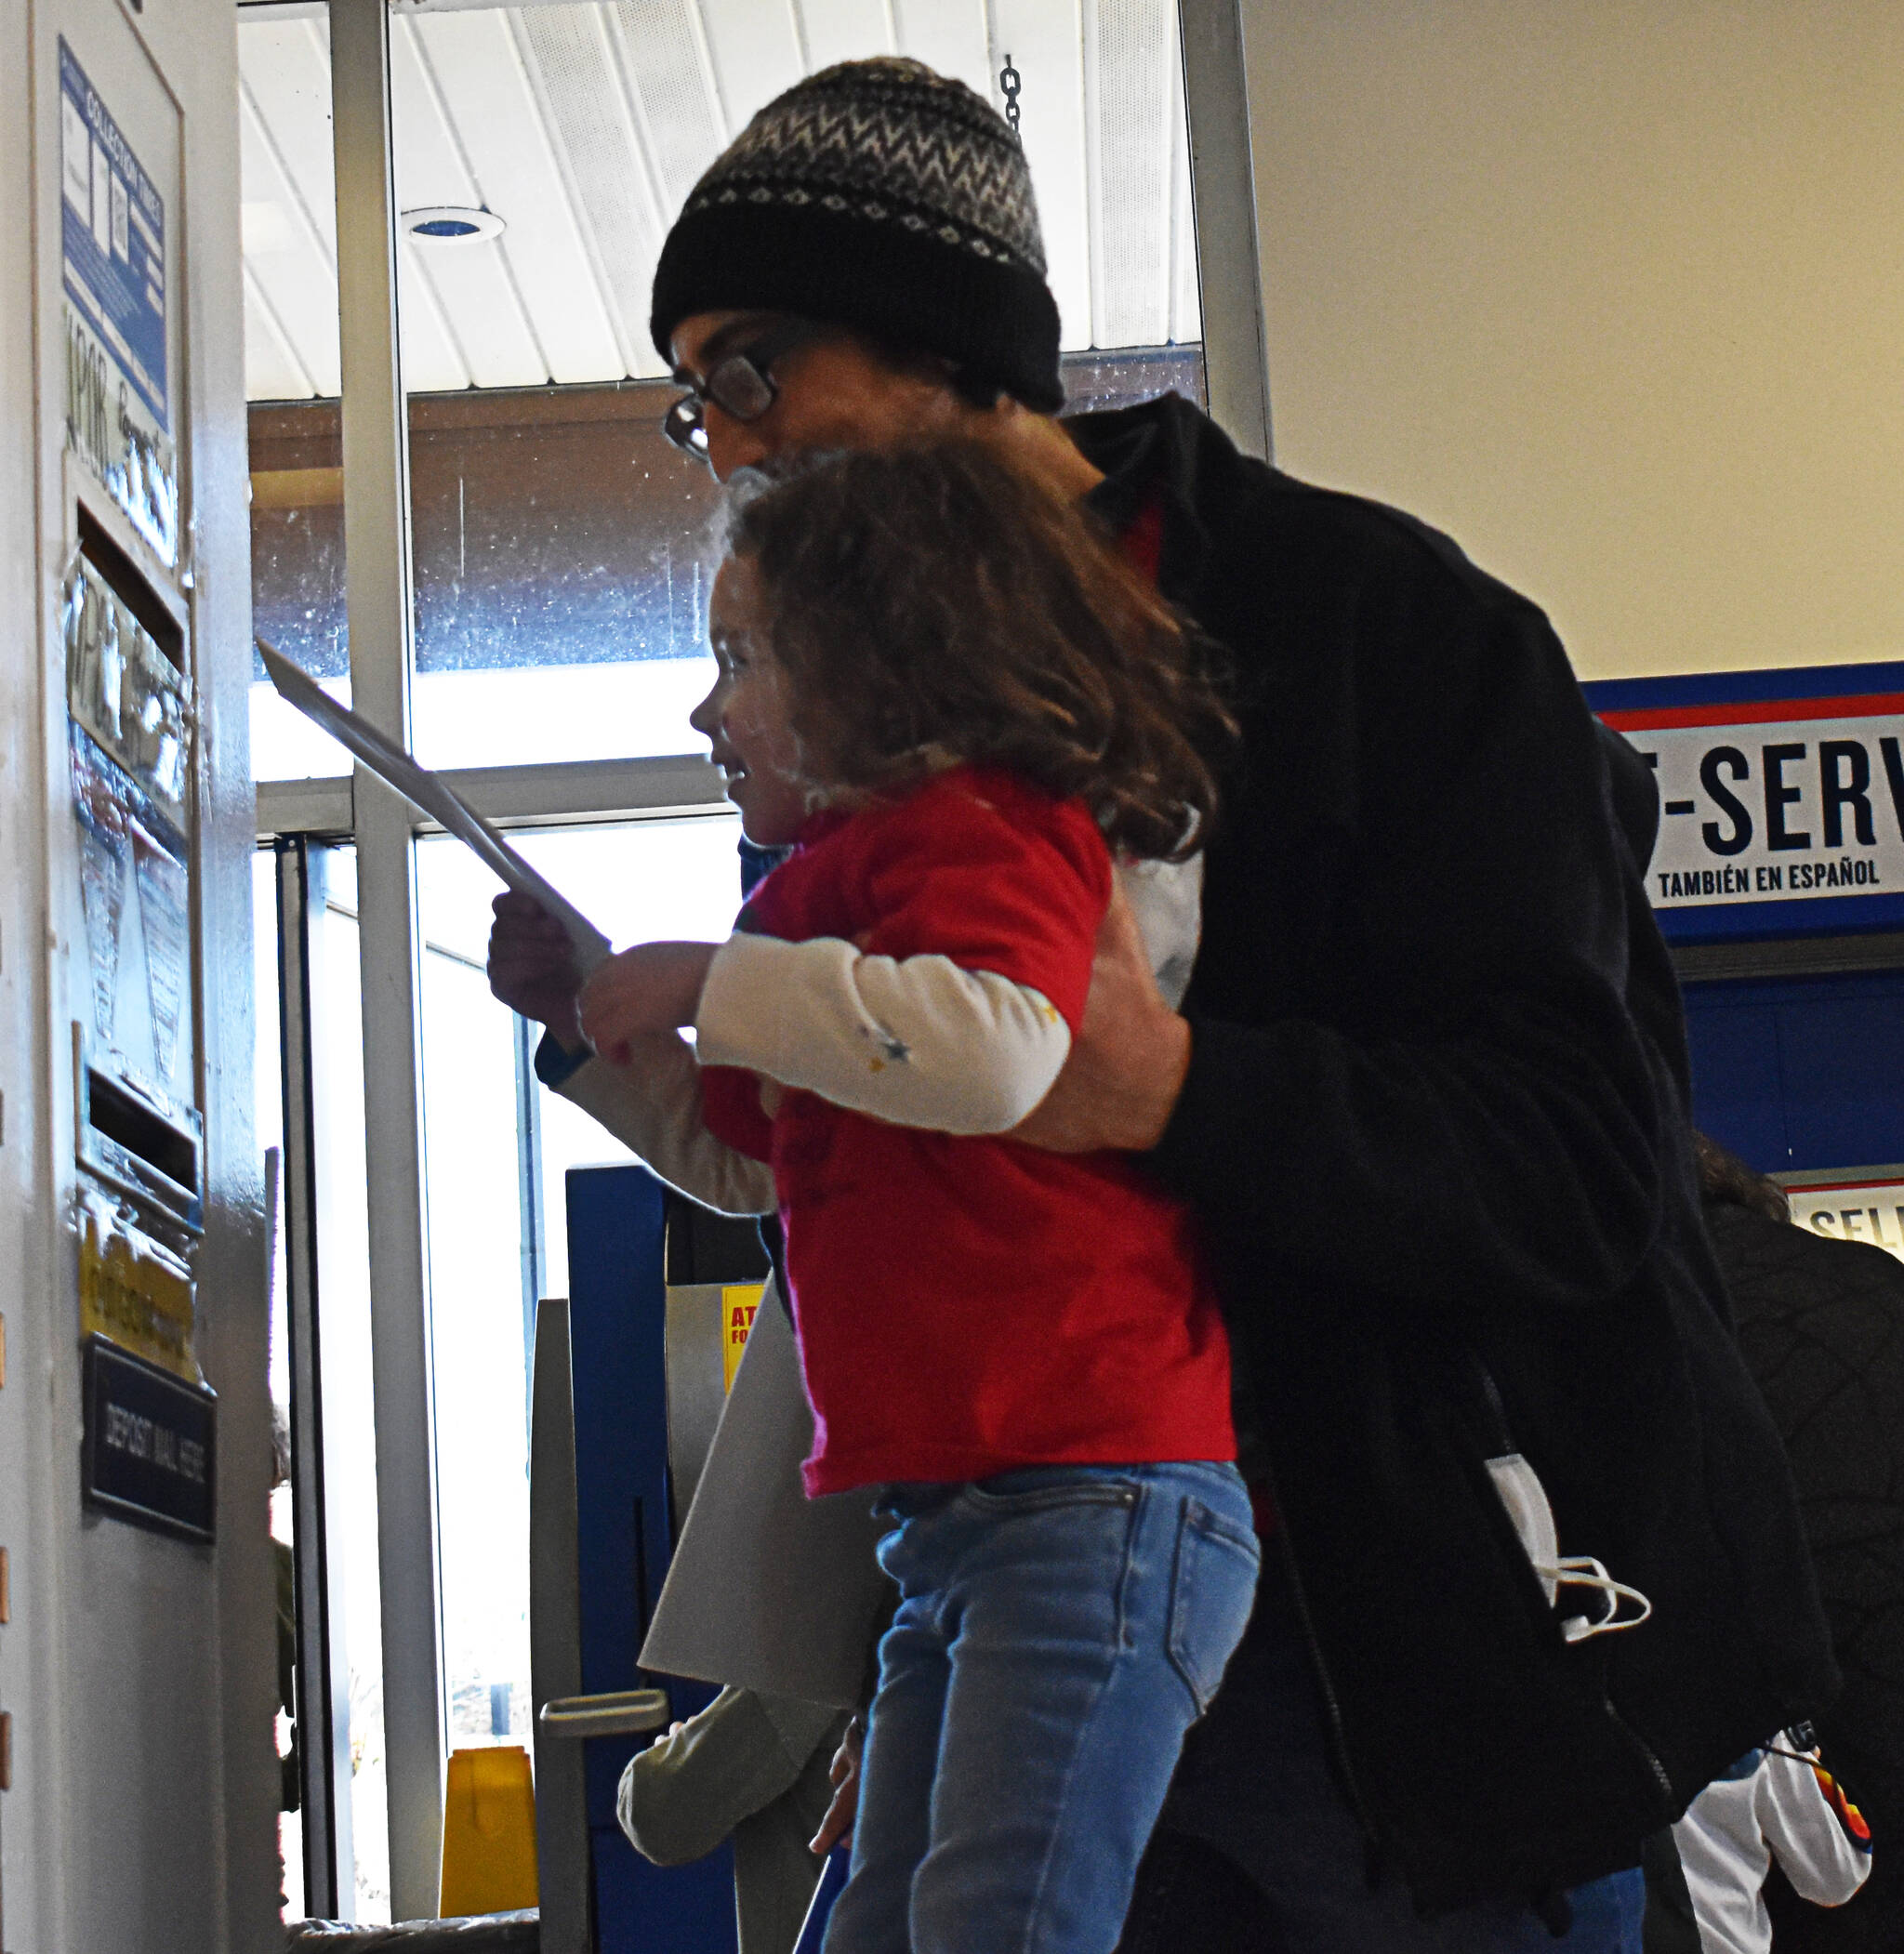 A father lifts his daughter to mail a peace letter at the Bainbridge Island Post Office in Winslow for the Young People’s March for Peace and Kindness Jan. 16.